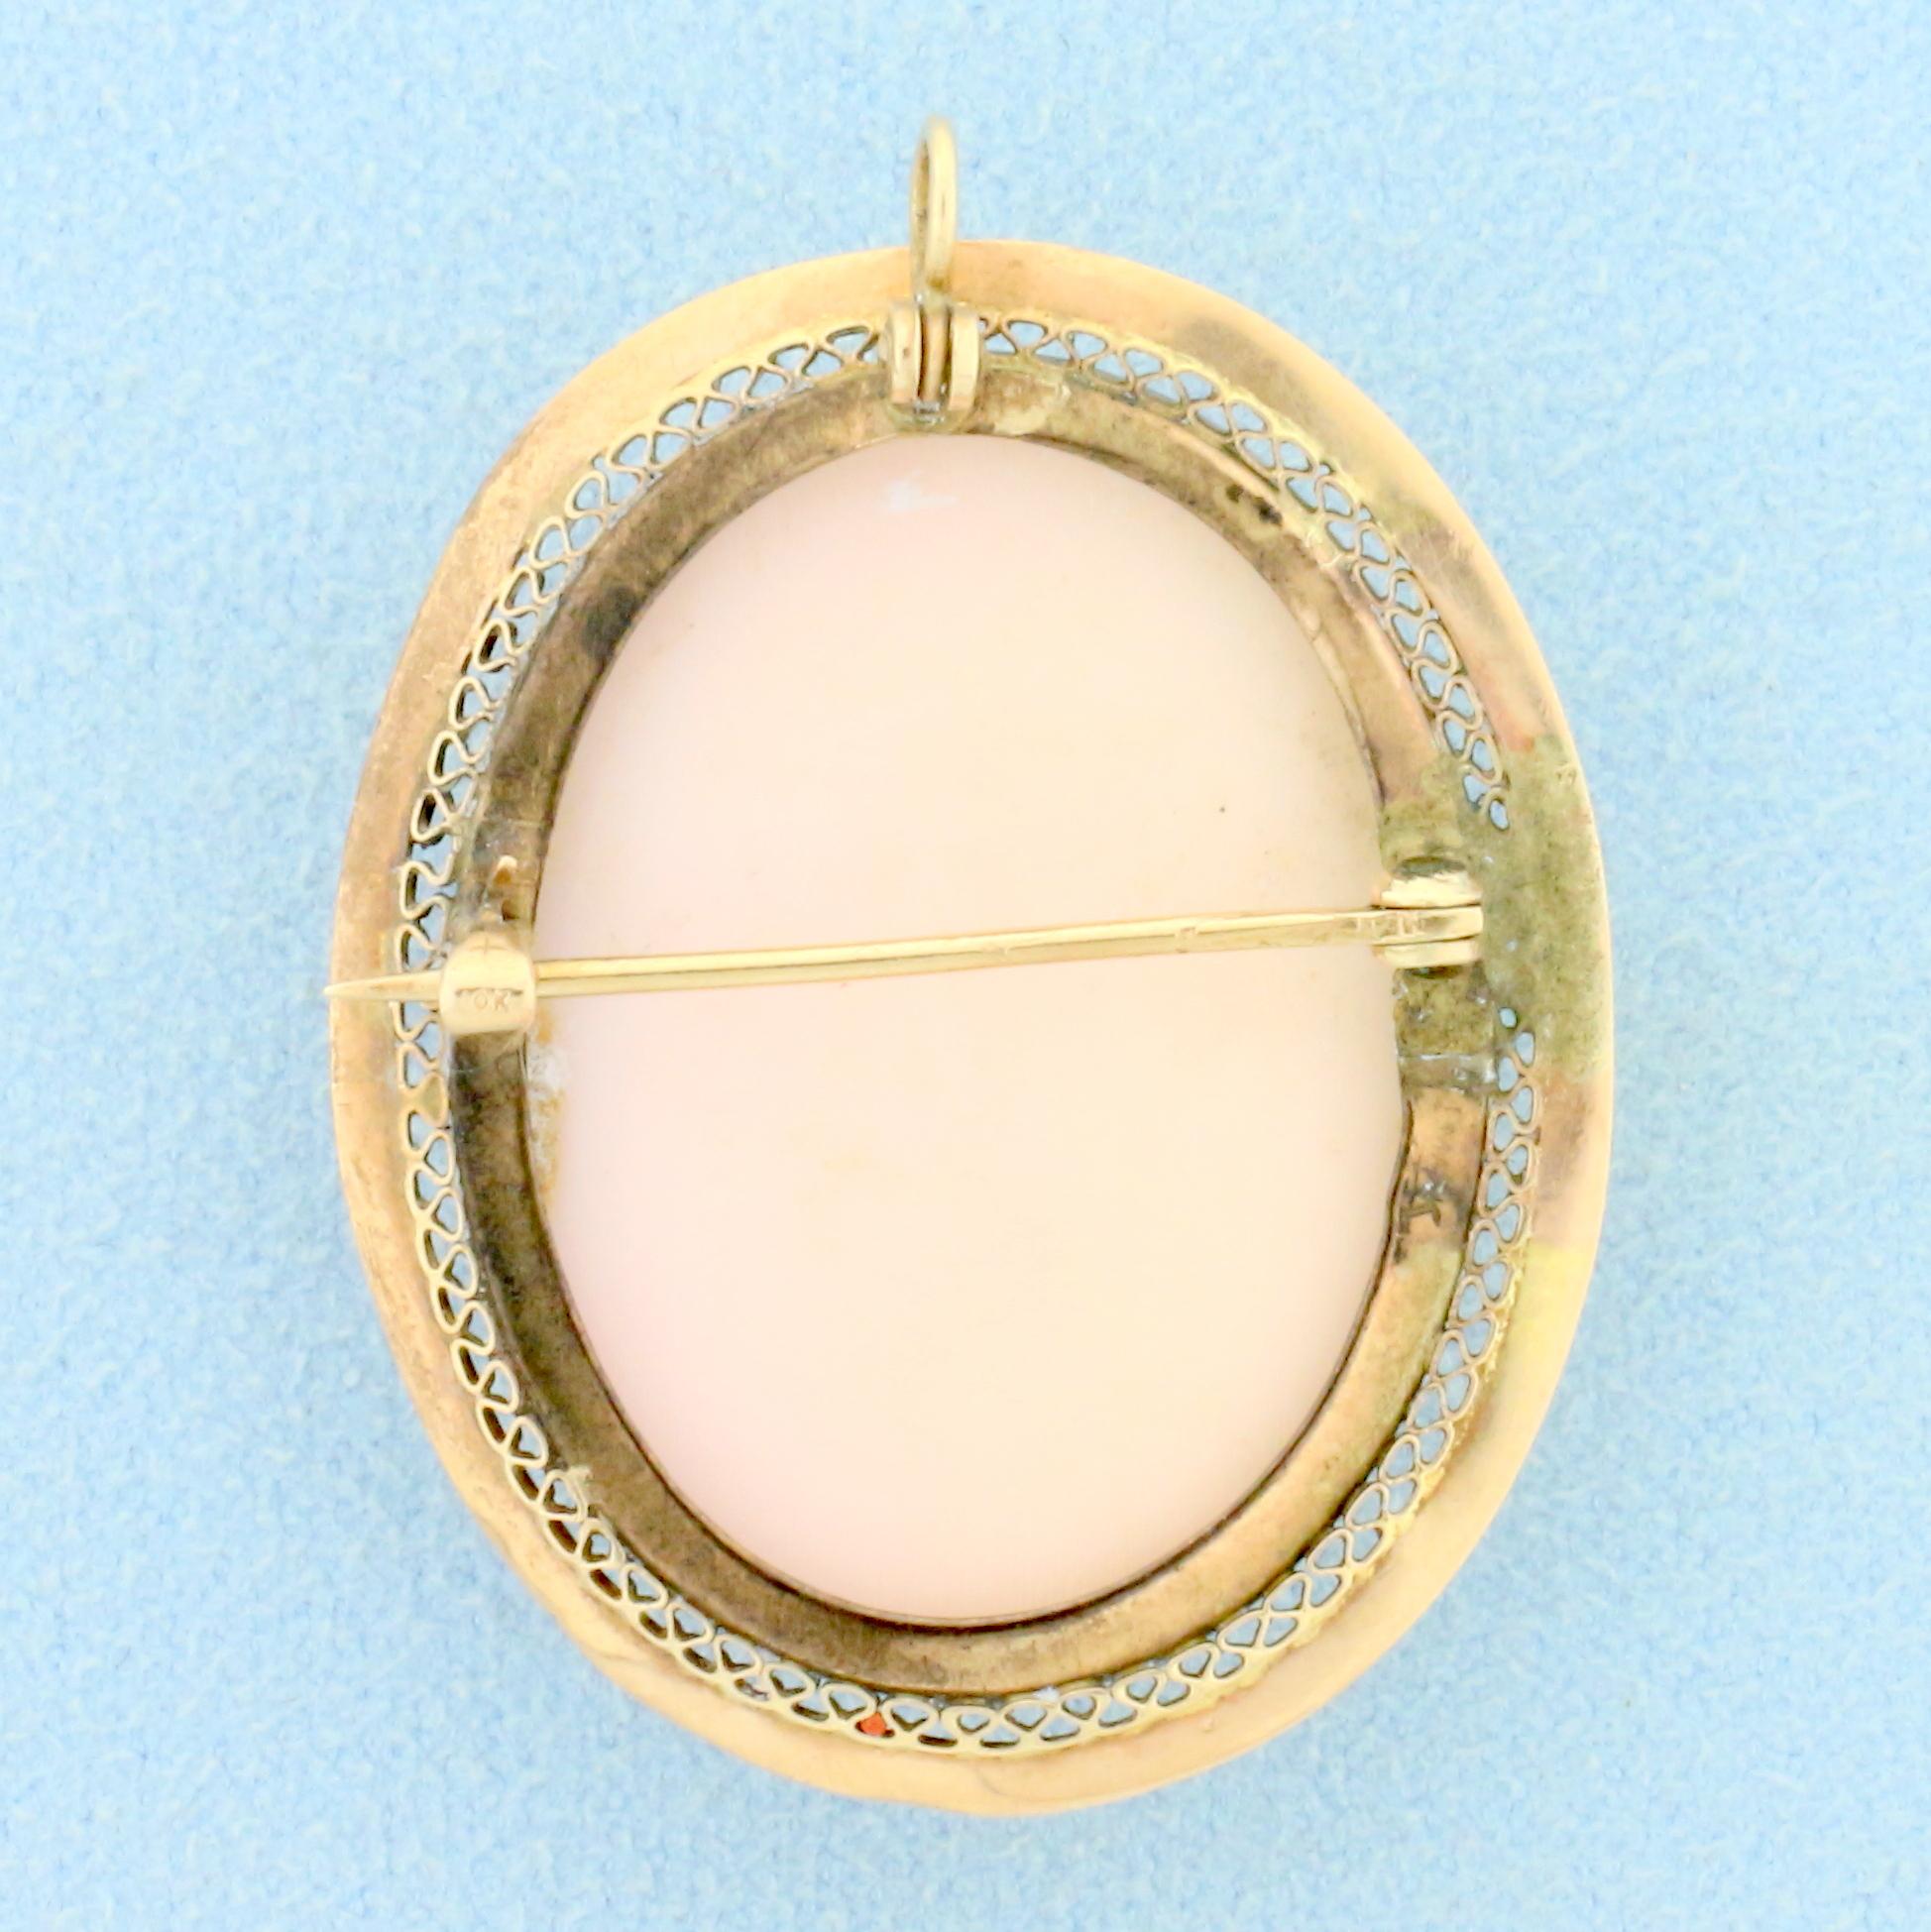 Pink Cameo Pendant Or Pin In 10k Yellow Gold